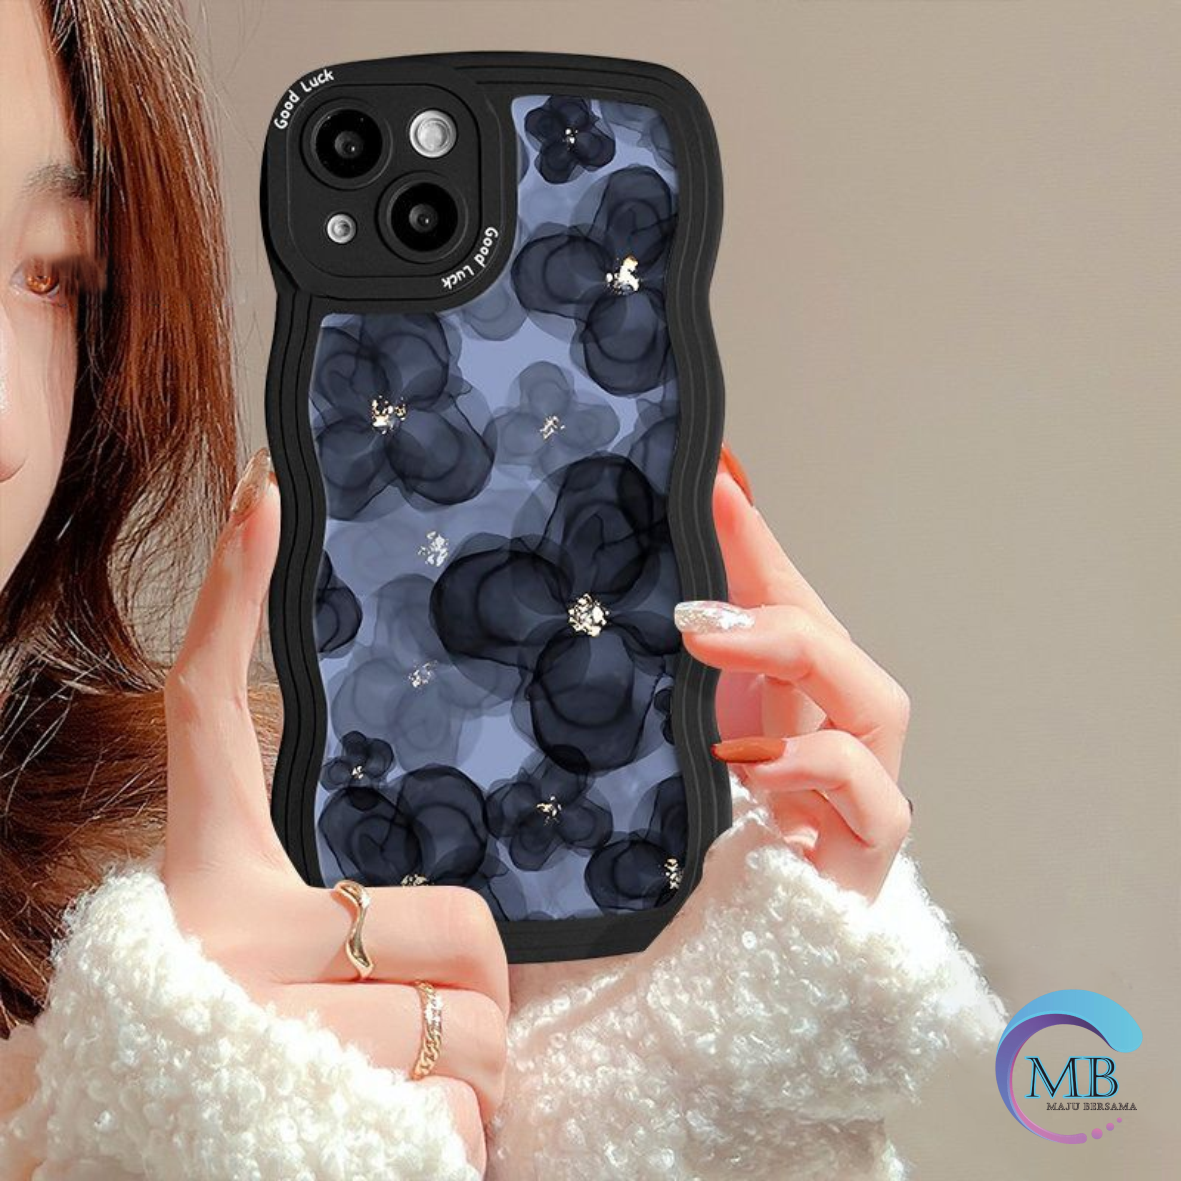 SS820 CASE SILIKON CASING OIL PAINTING FLOWER FOR IPHONE 6 6S 7 8 7+ 8+ X XS XR XS MAX 11 12 13 14 PRO MAX MB4991